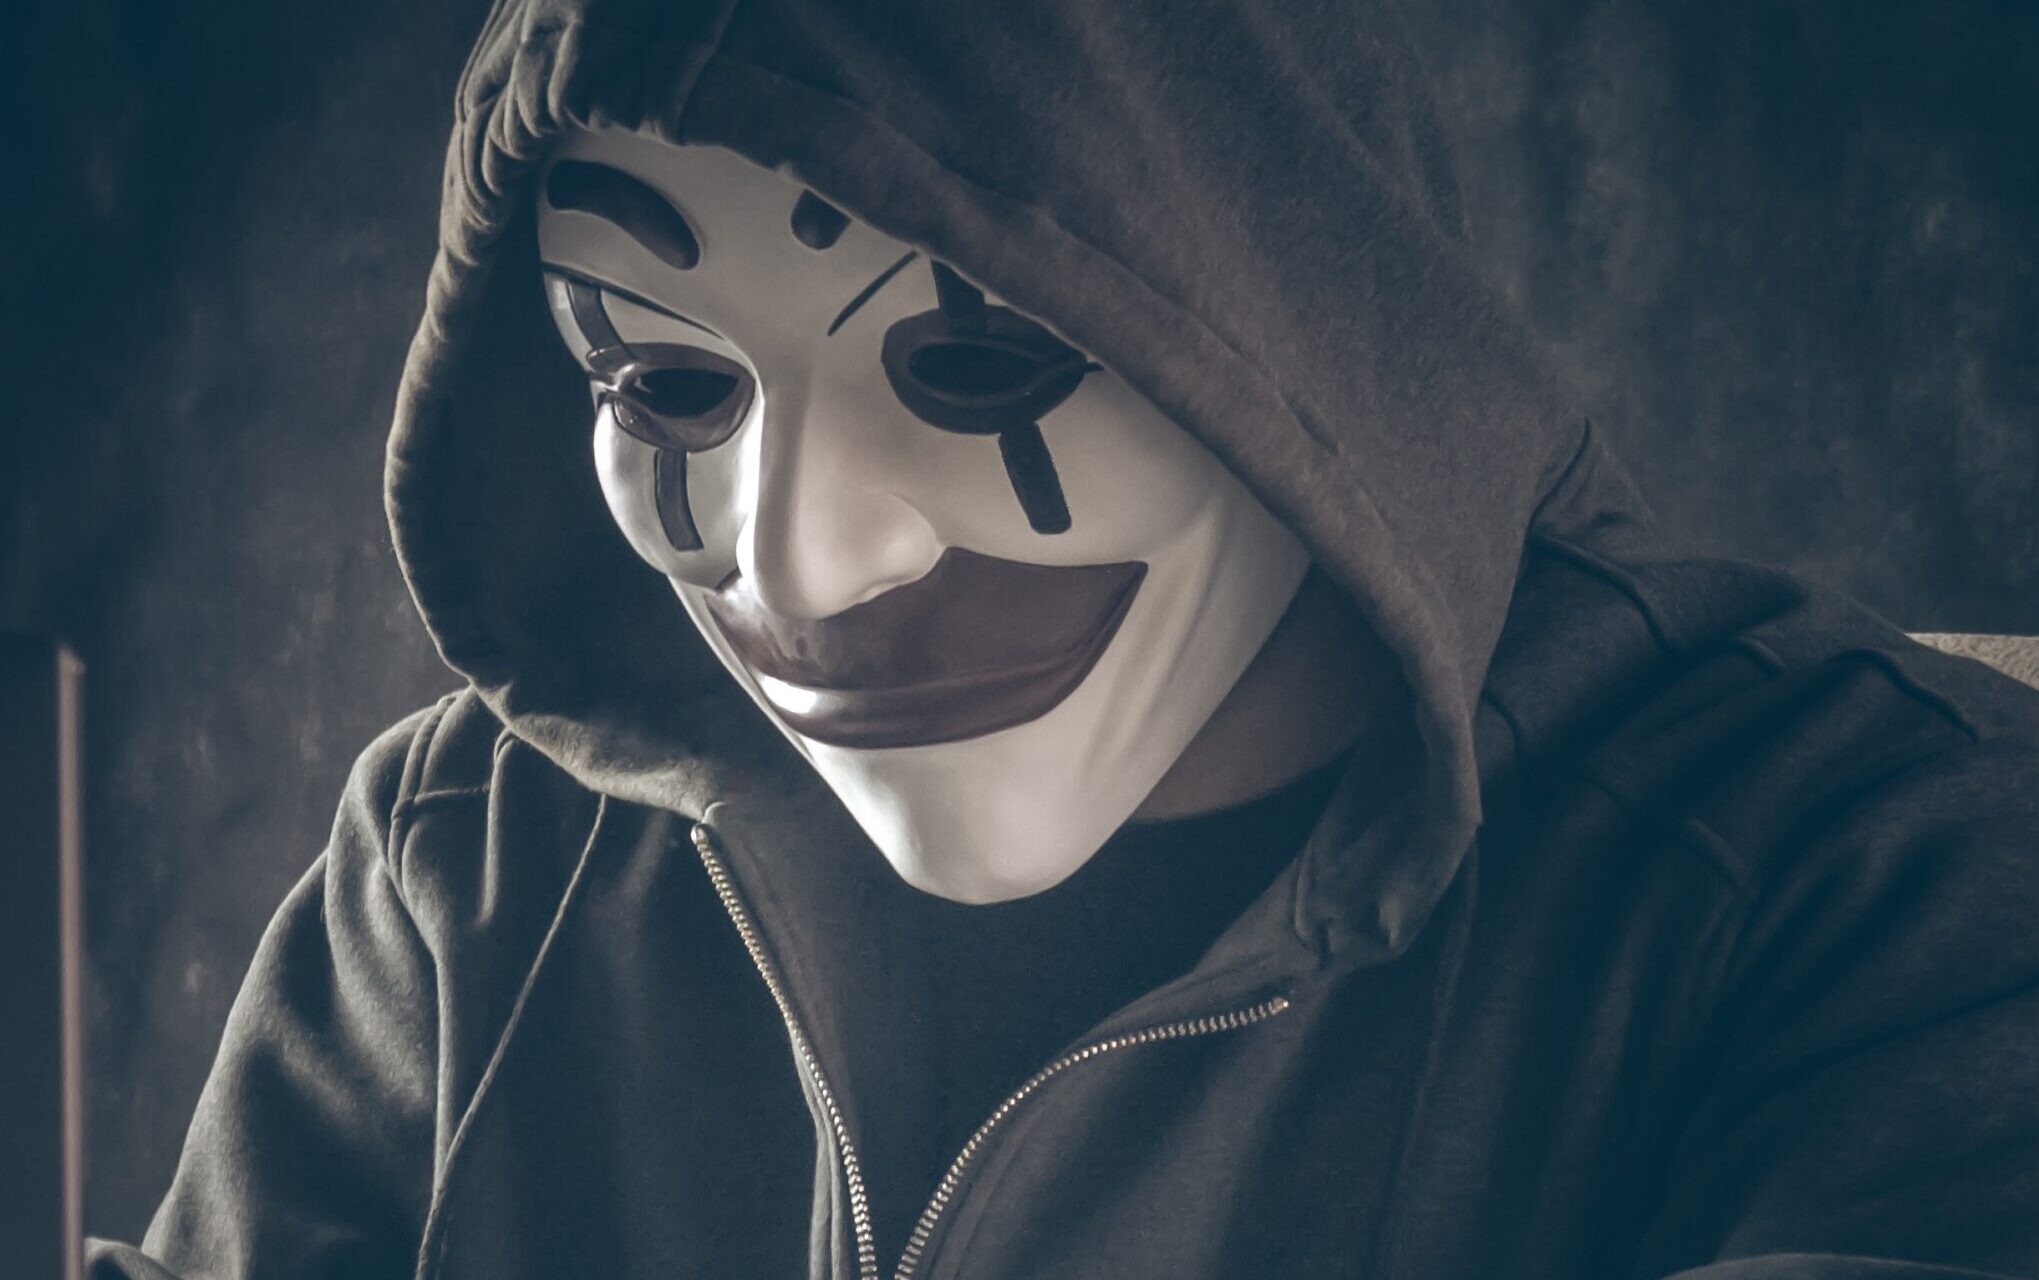 Anonymous computer hacker in white mask and hoodie.Instagram - @bermixstudio | Donation https://paypal.me/bermixclub Goal: $0 of $100 - any amount appreciated 🤘